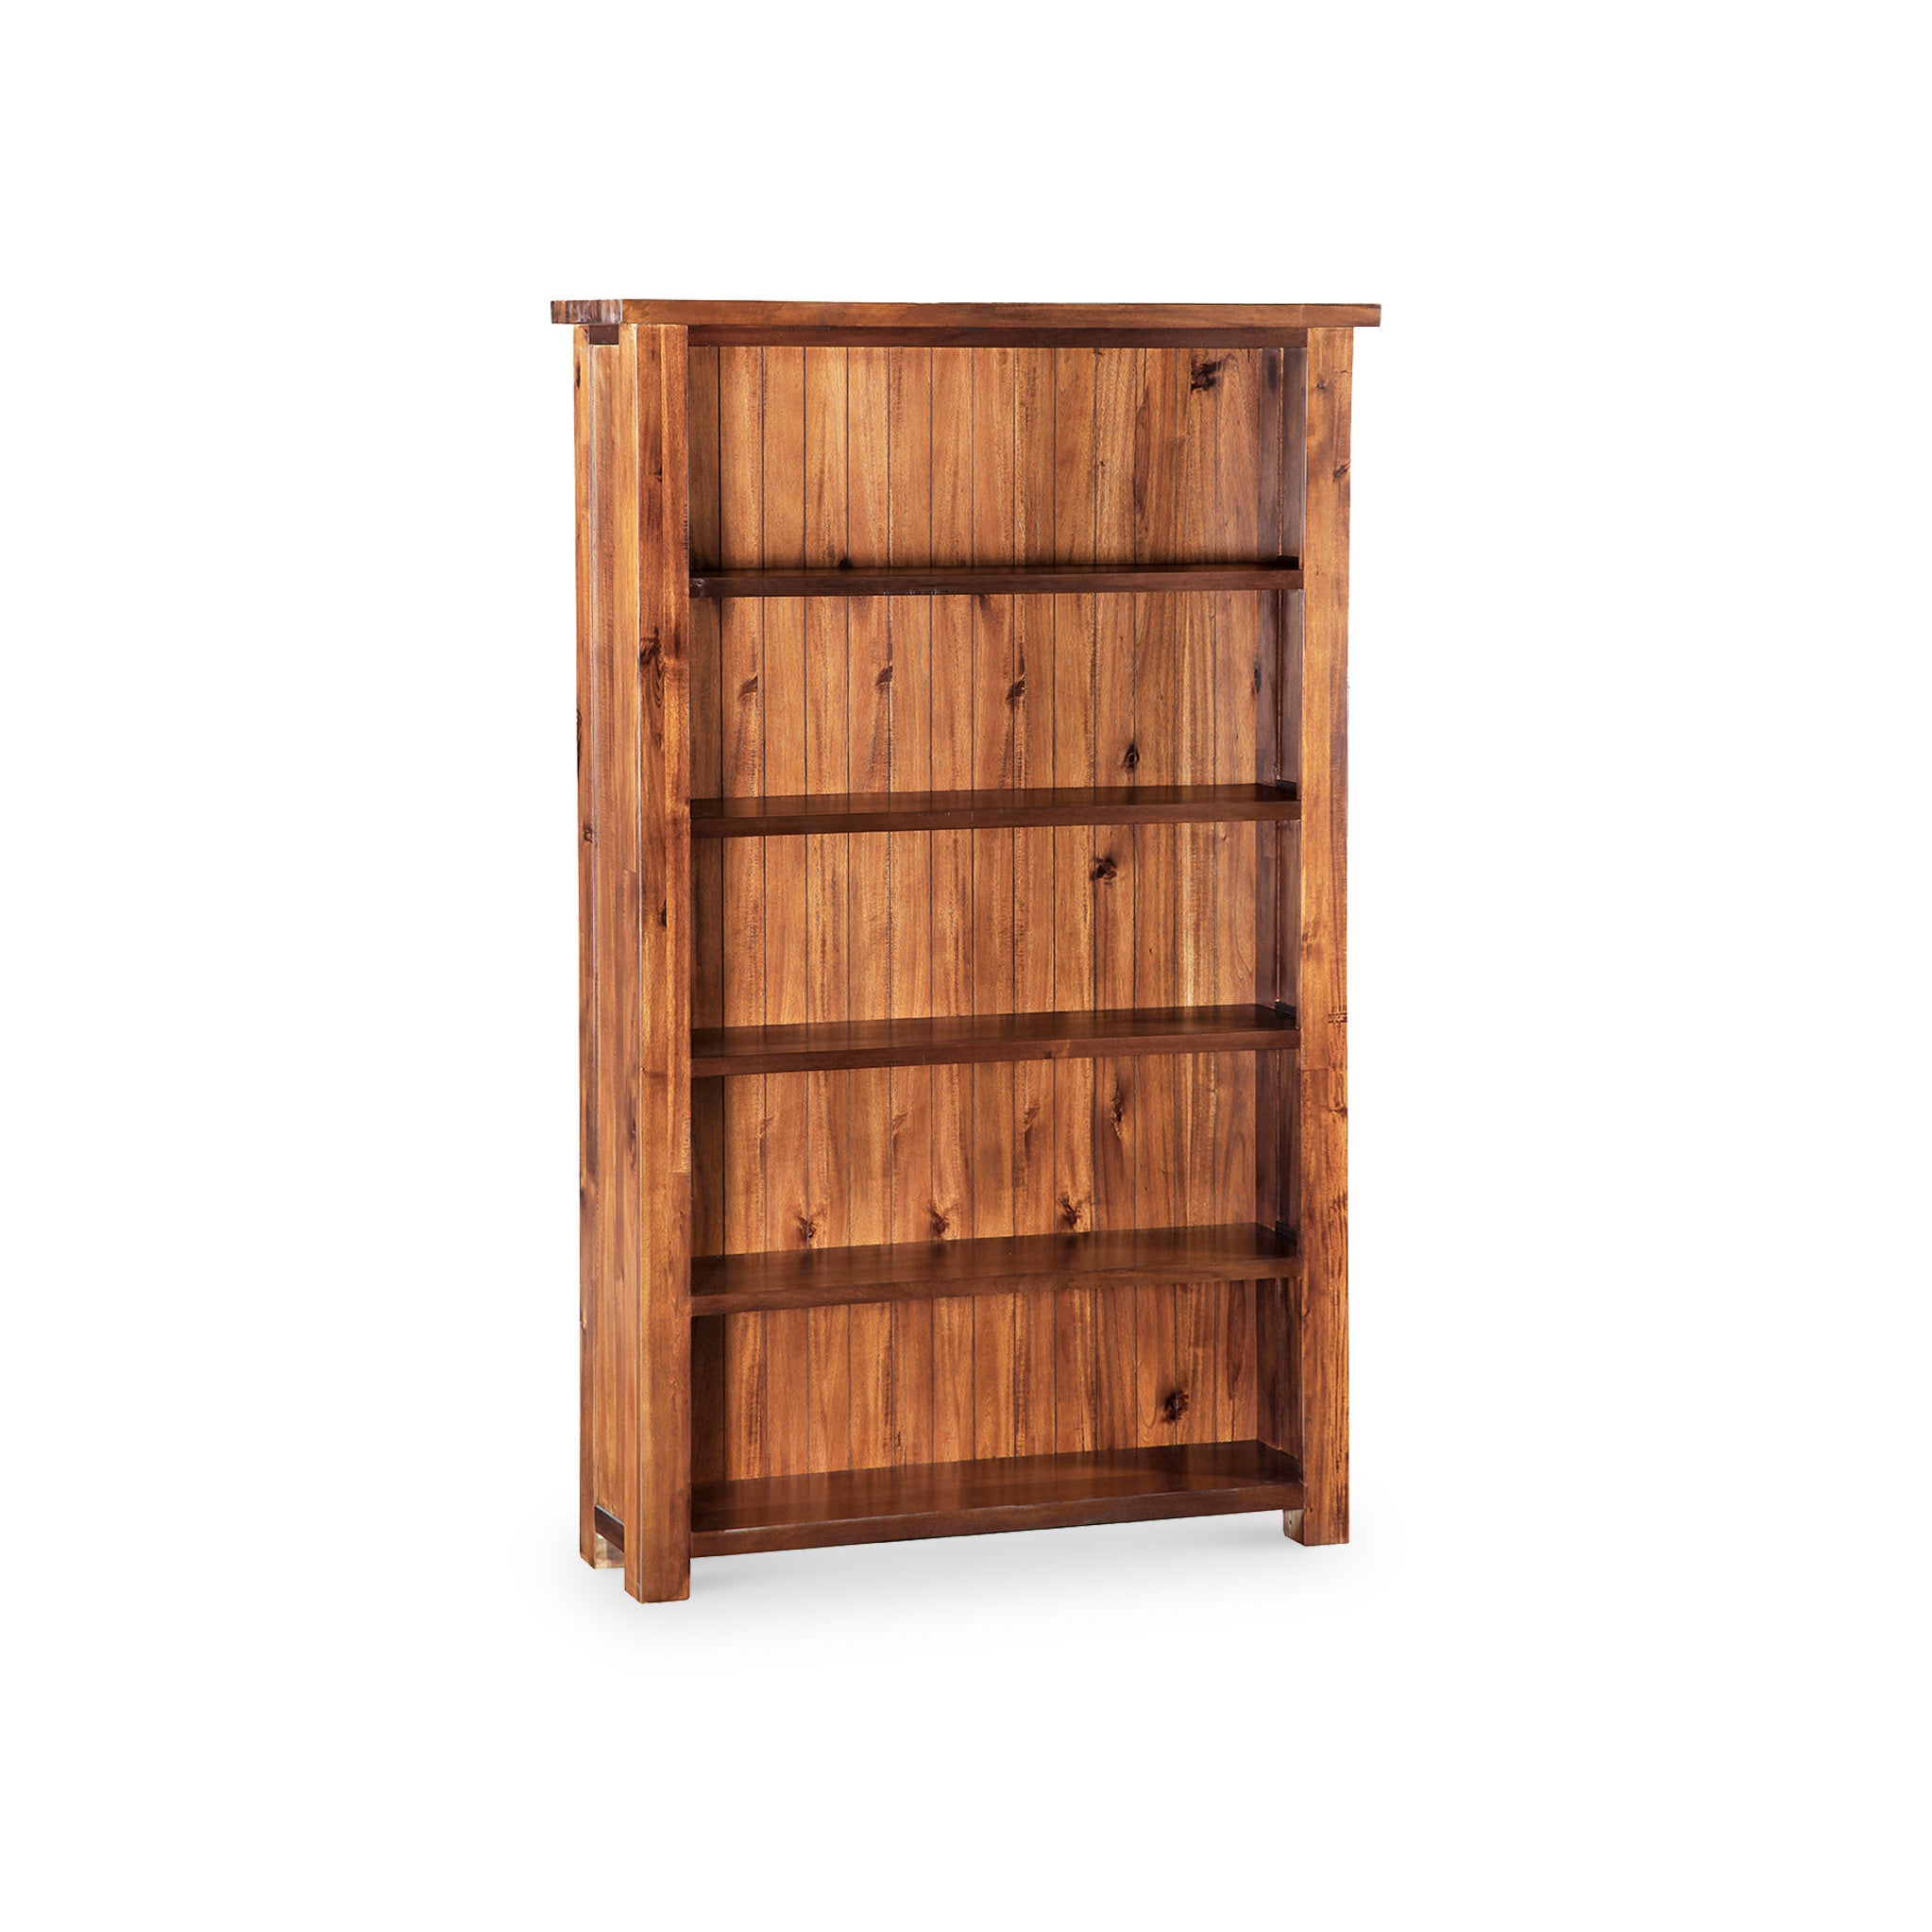 Ladock Acacia Large Bookcase For Living Room